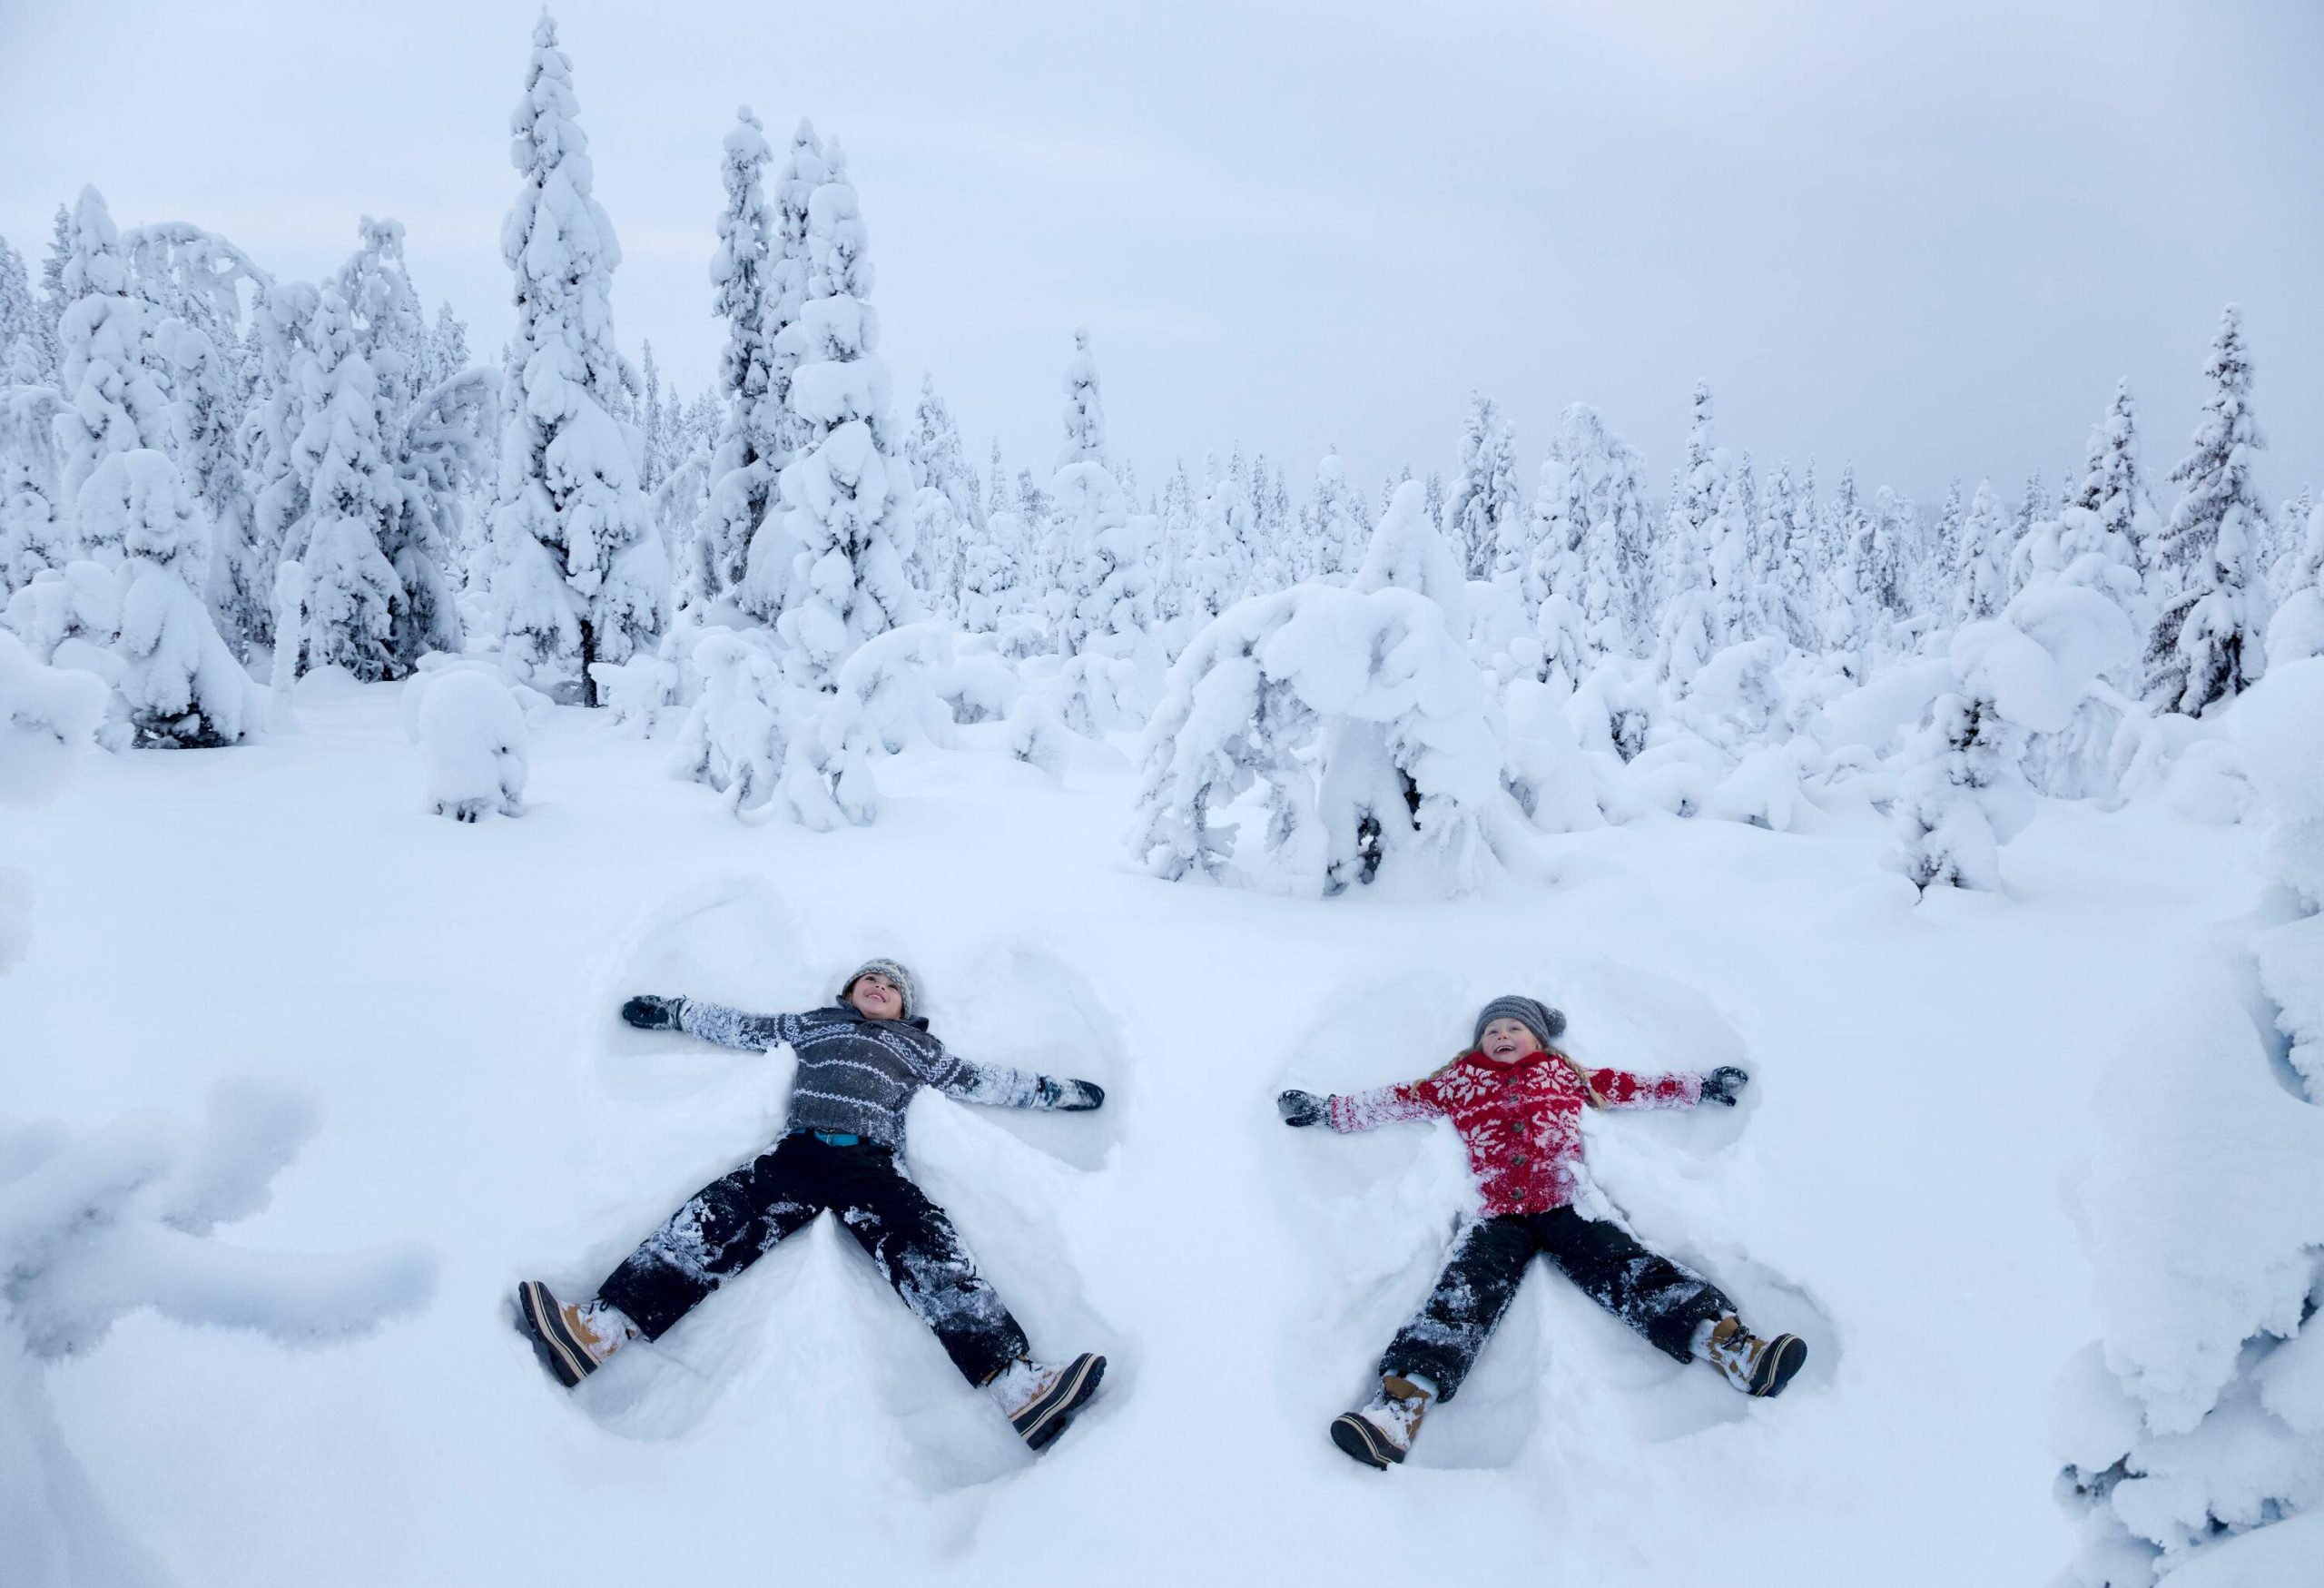 Two kids making snow angels in the snow, with heavily frosted trees behind them.